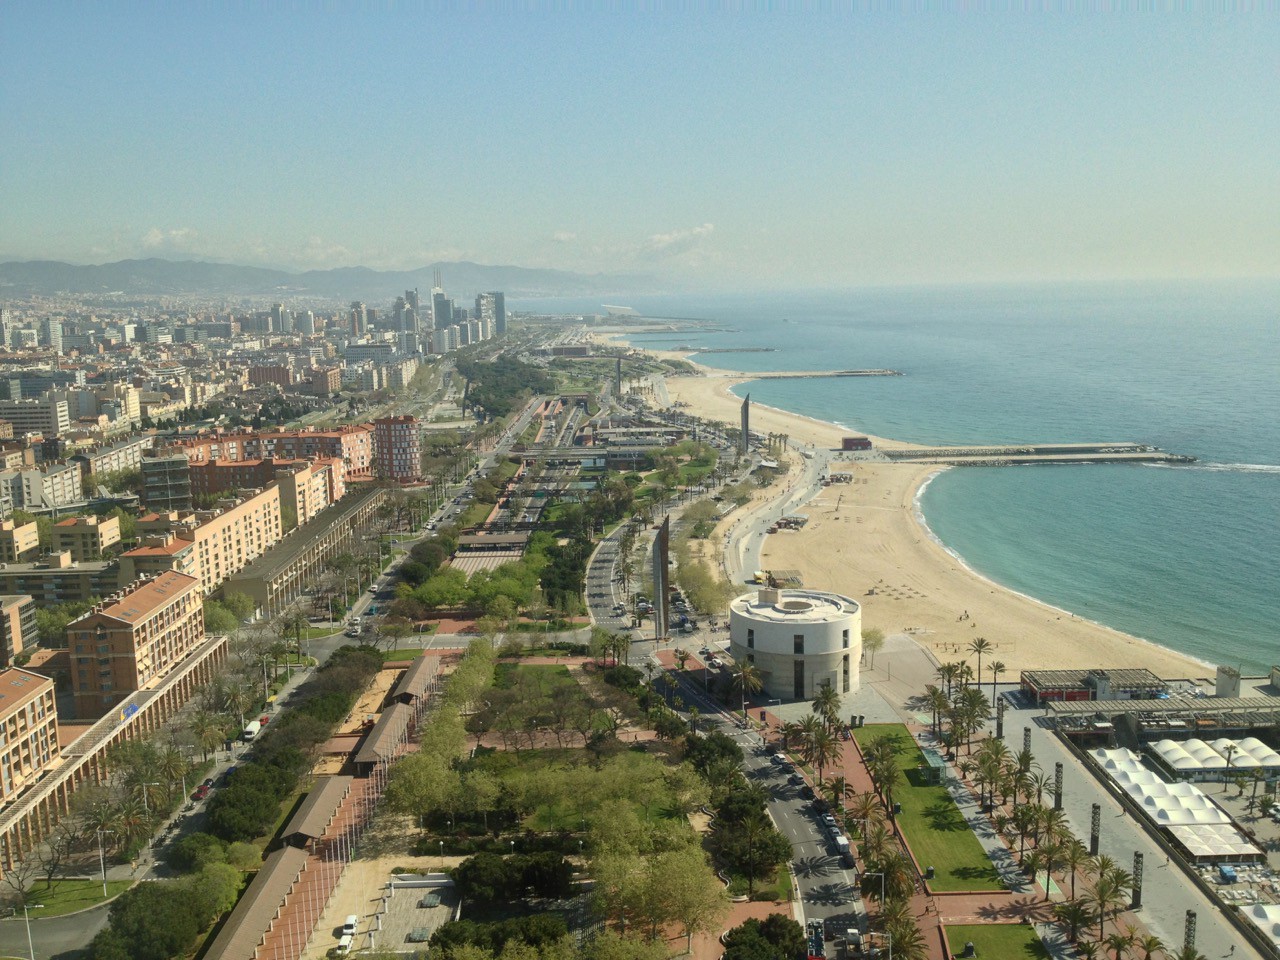 View from the German Embassy in Barcelona